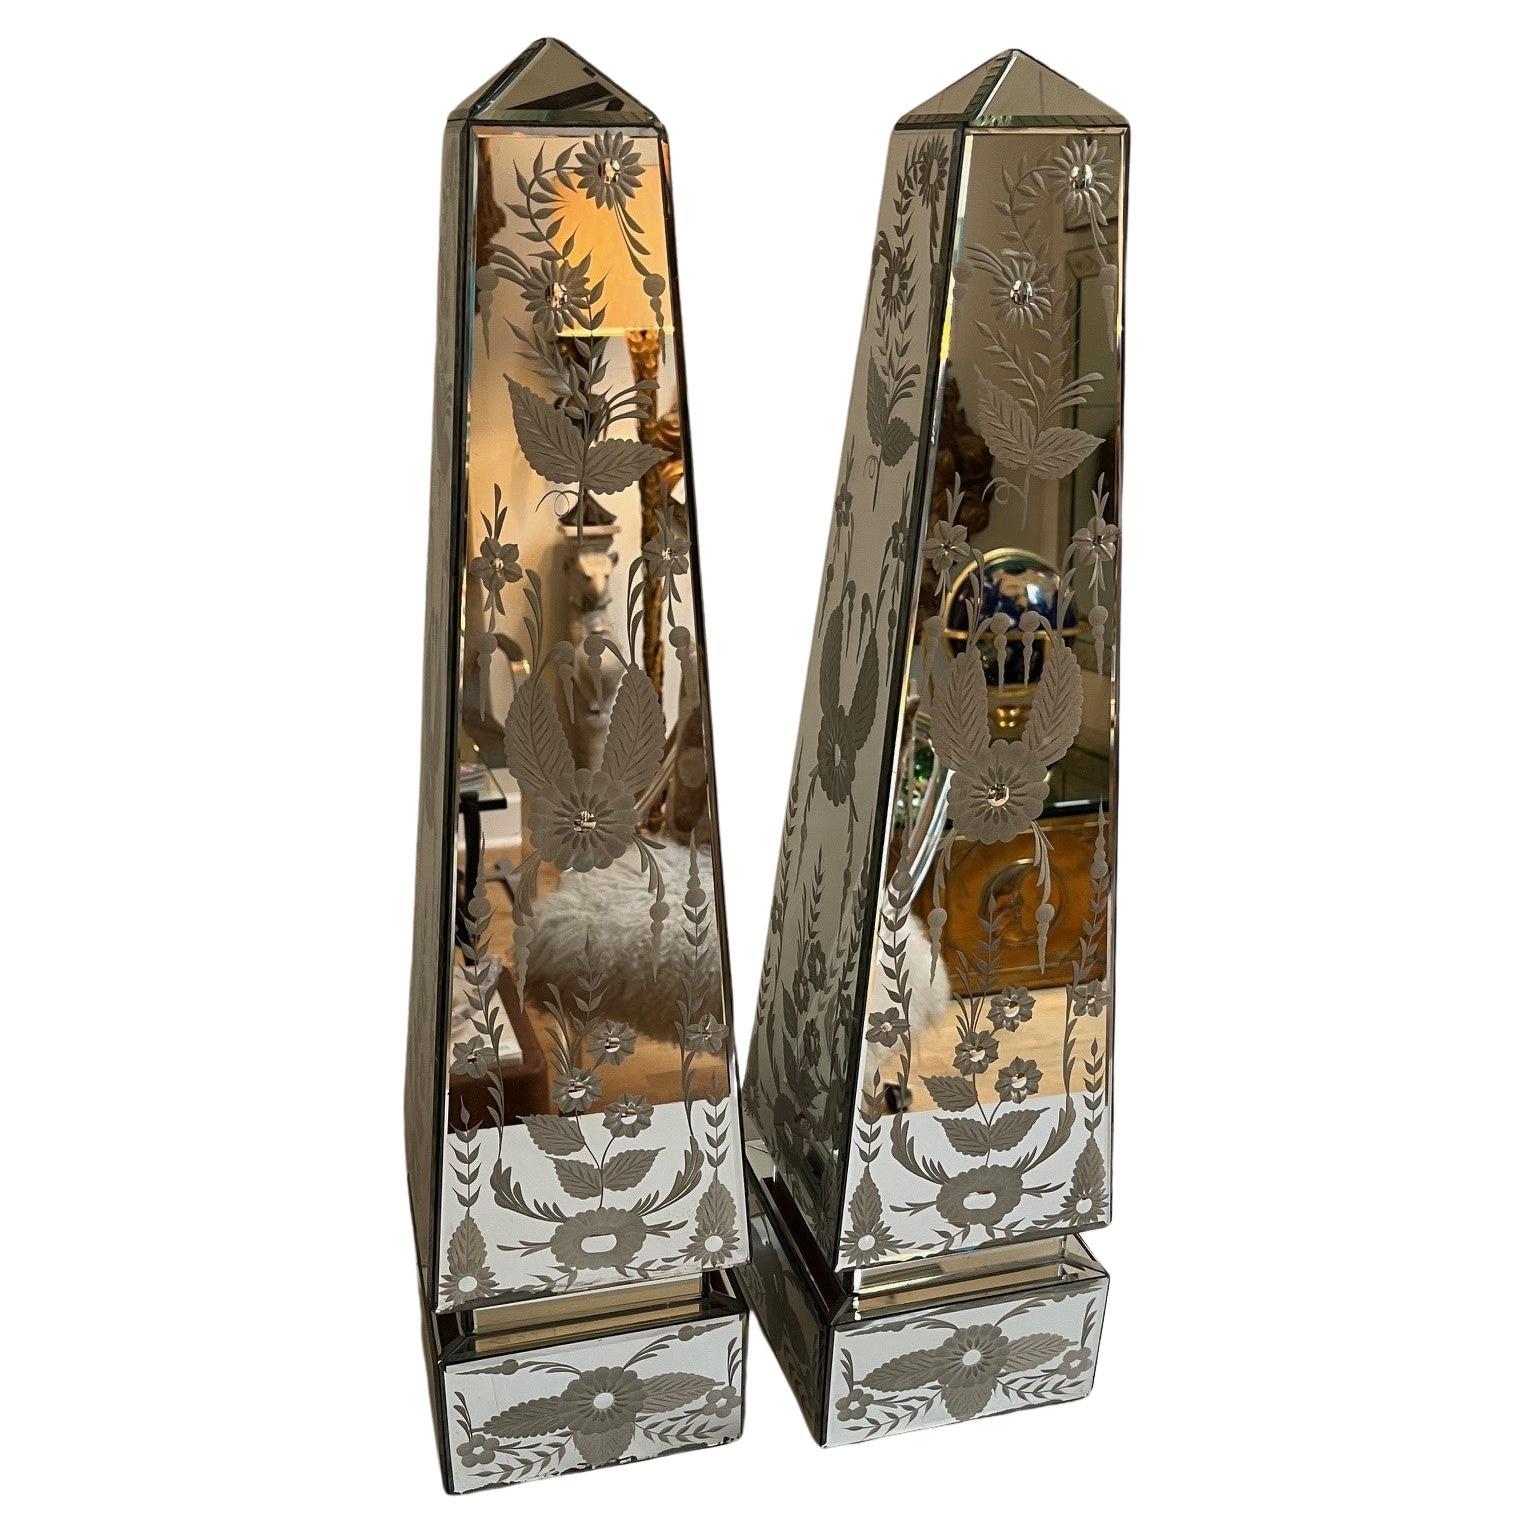 Pair of Exquisite Etched Floral Designs Mirrored Obelisk For Sale